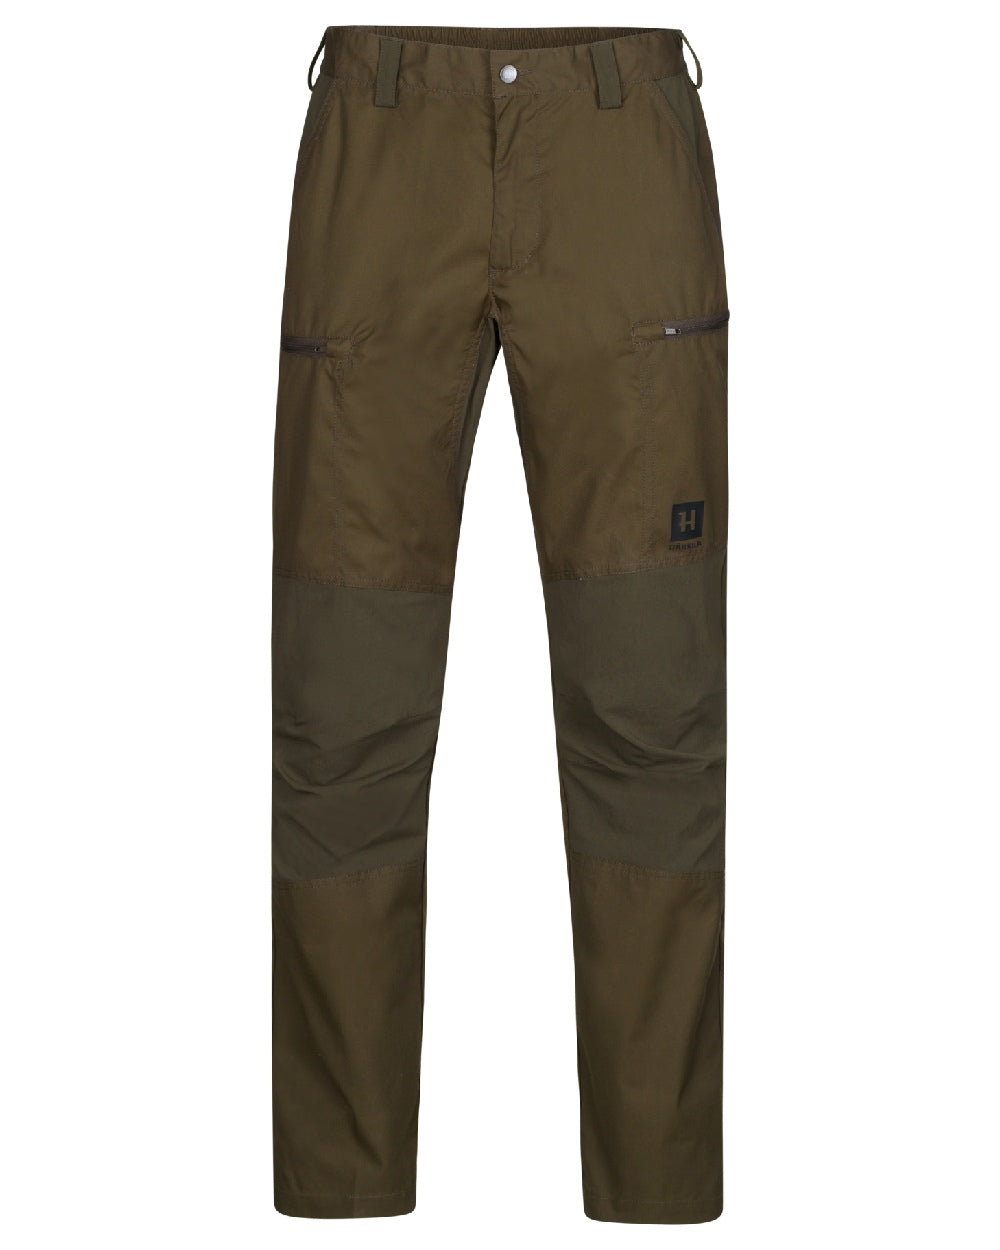 Light Willow Green/Willow Green coloured Harkila Fjell Trousers on white background 